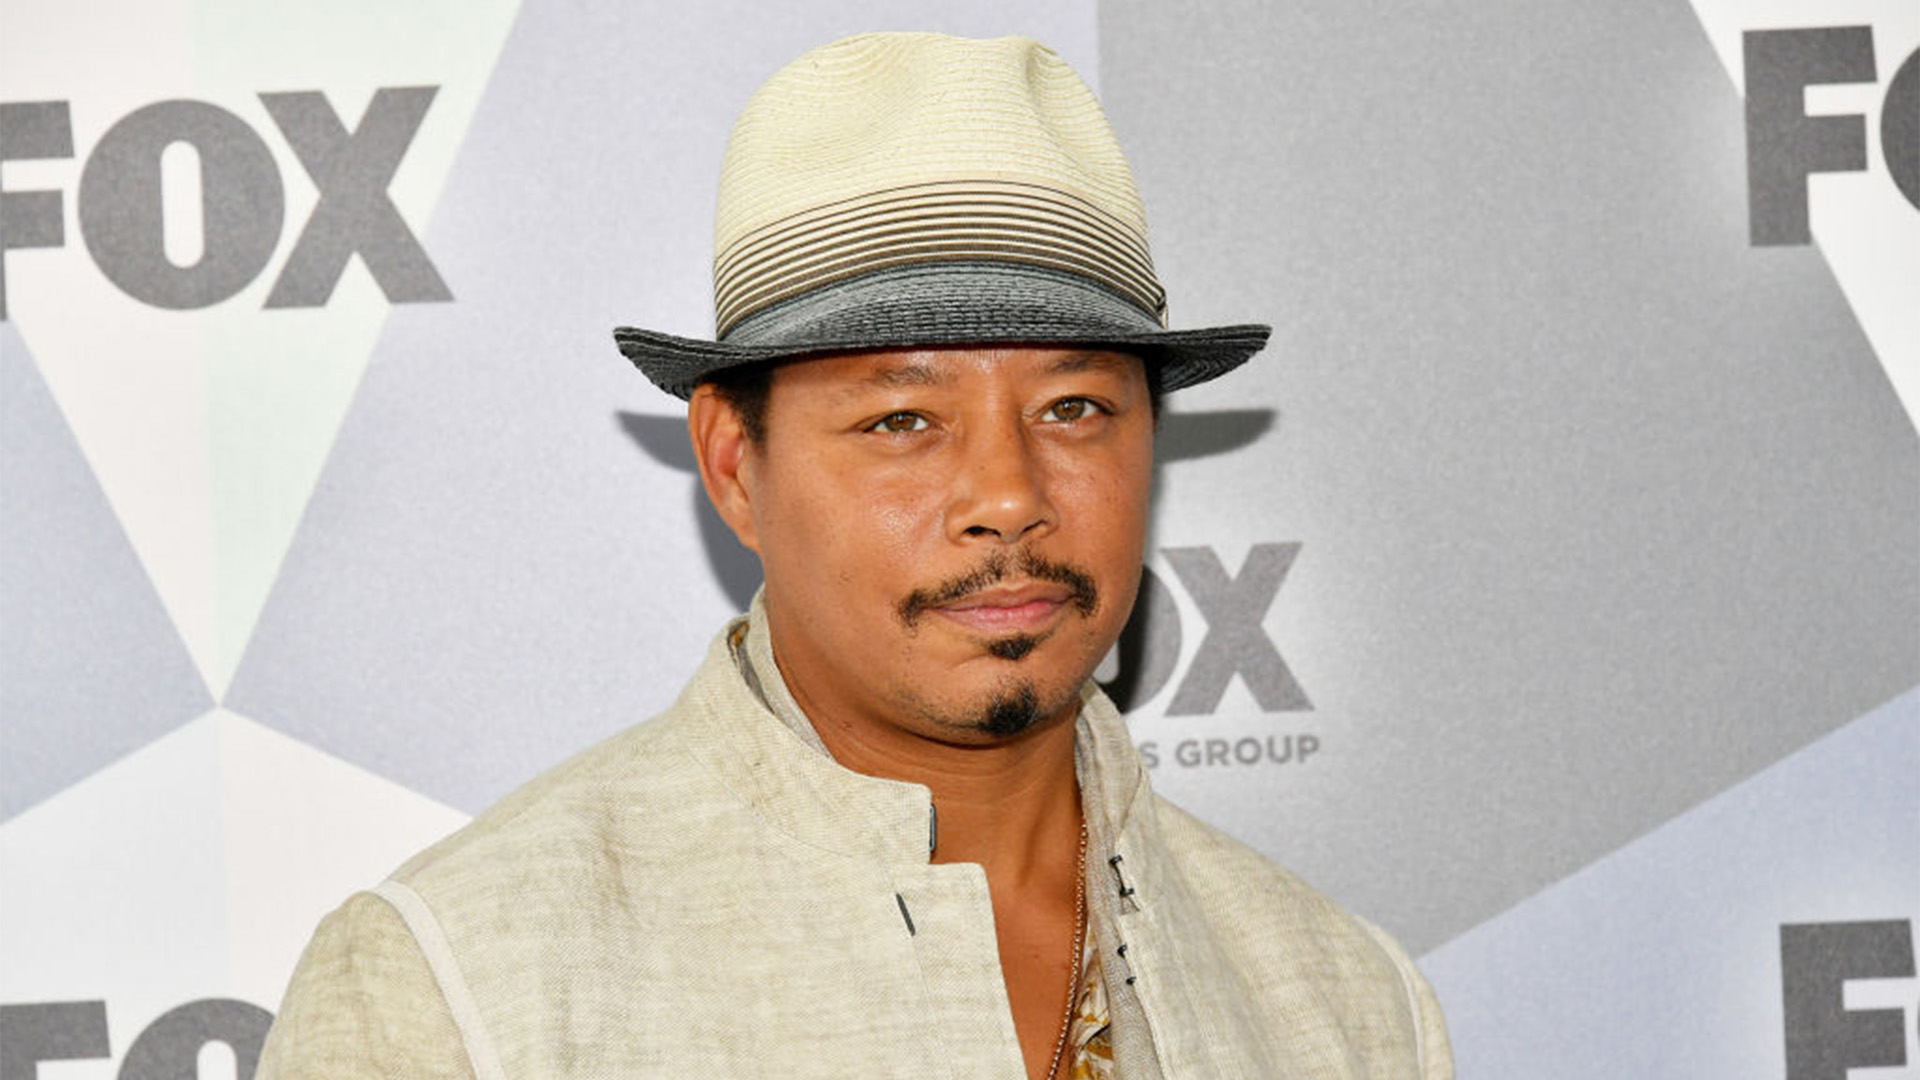 Terrence Howard Claims His Photo Was Used For The 'Empire' Logo Without His Permission, Says It's 'Worth $100M At Least'